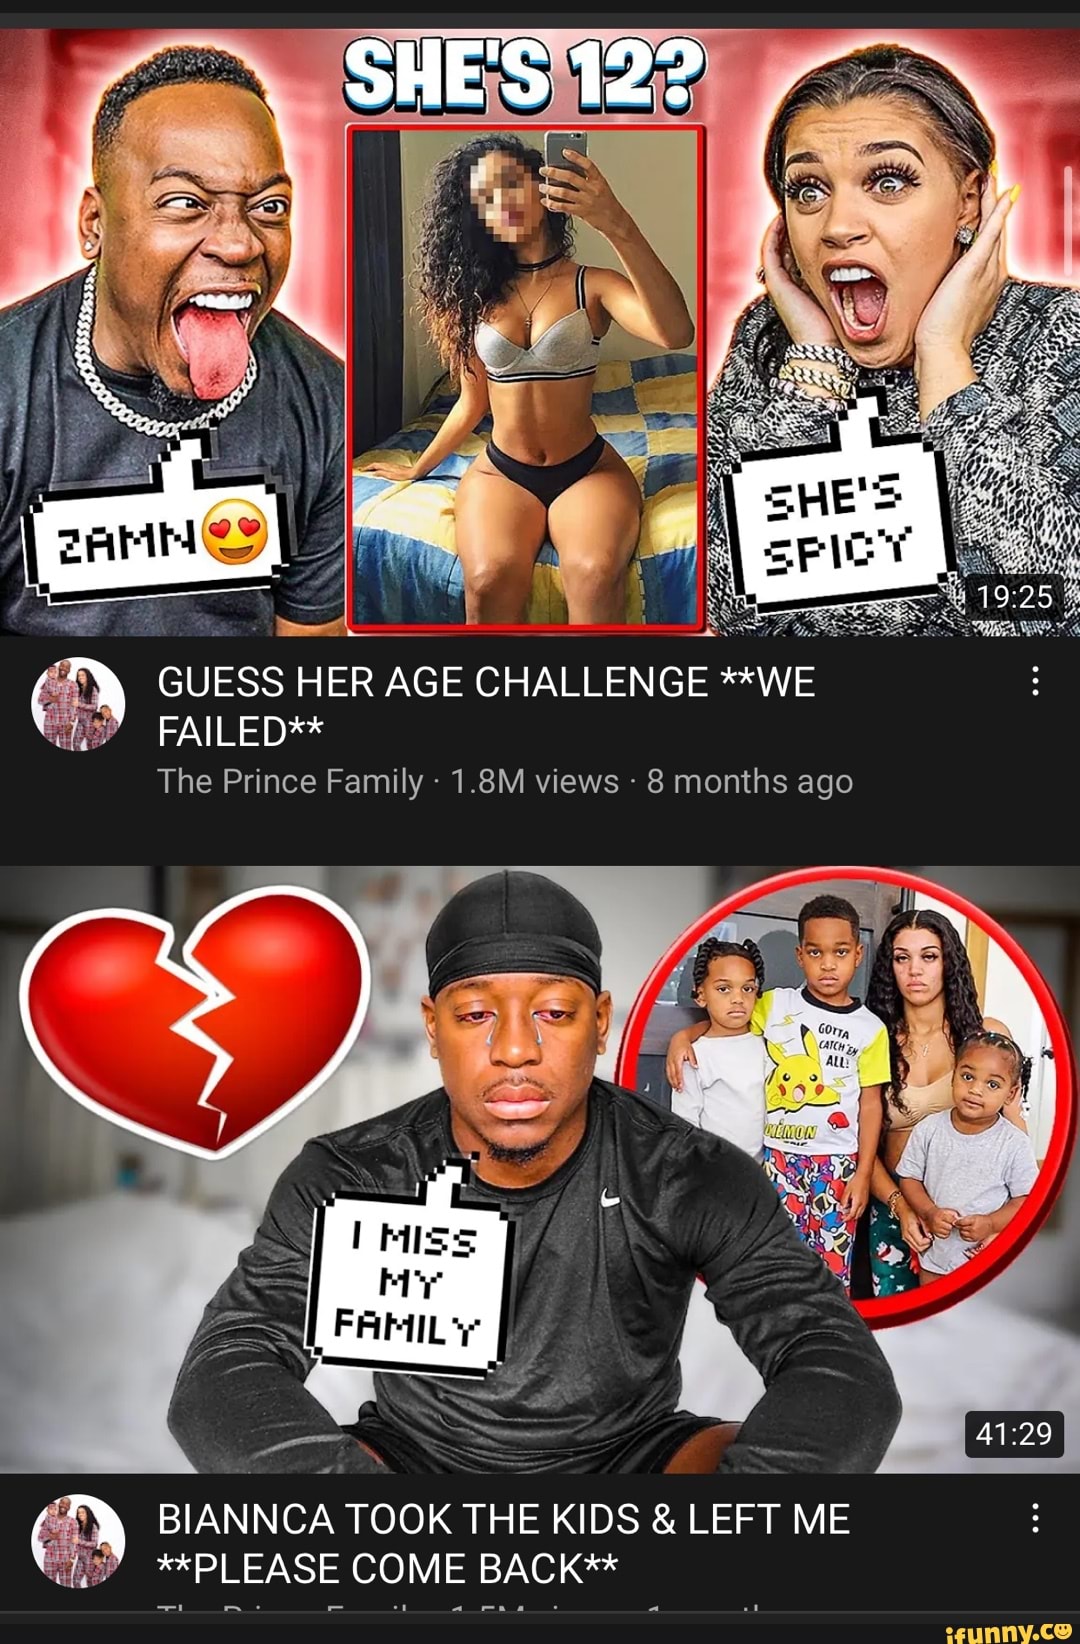 12? GUESS HER AGE CHALLENGE **WE FAILED** The Prince Family - 1.8M - 8 months ago BIANNCA TOOK THE KIDS & LEFT ME COME BACK** - )